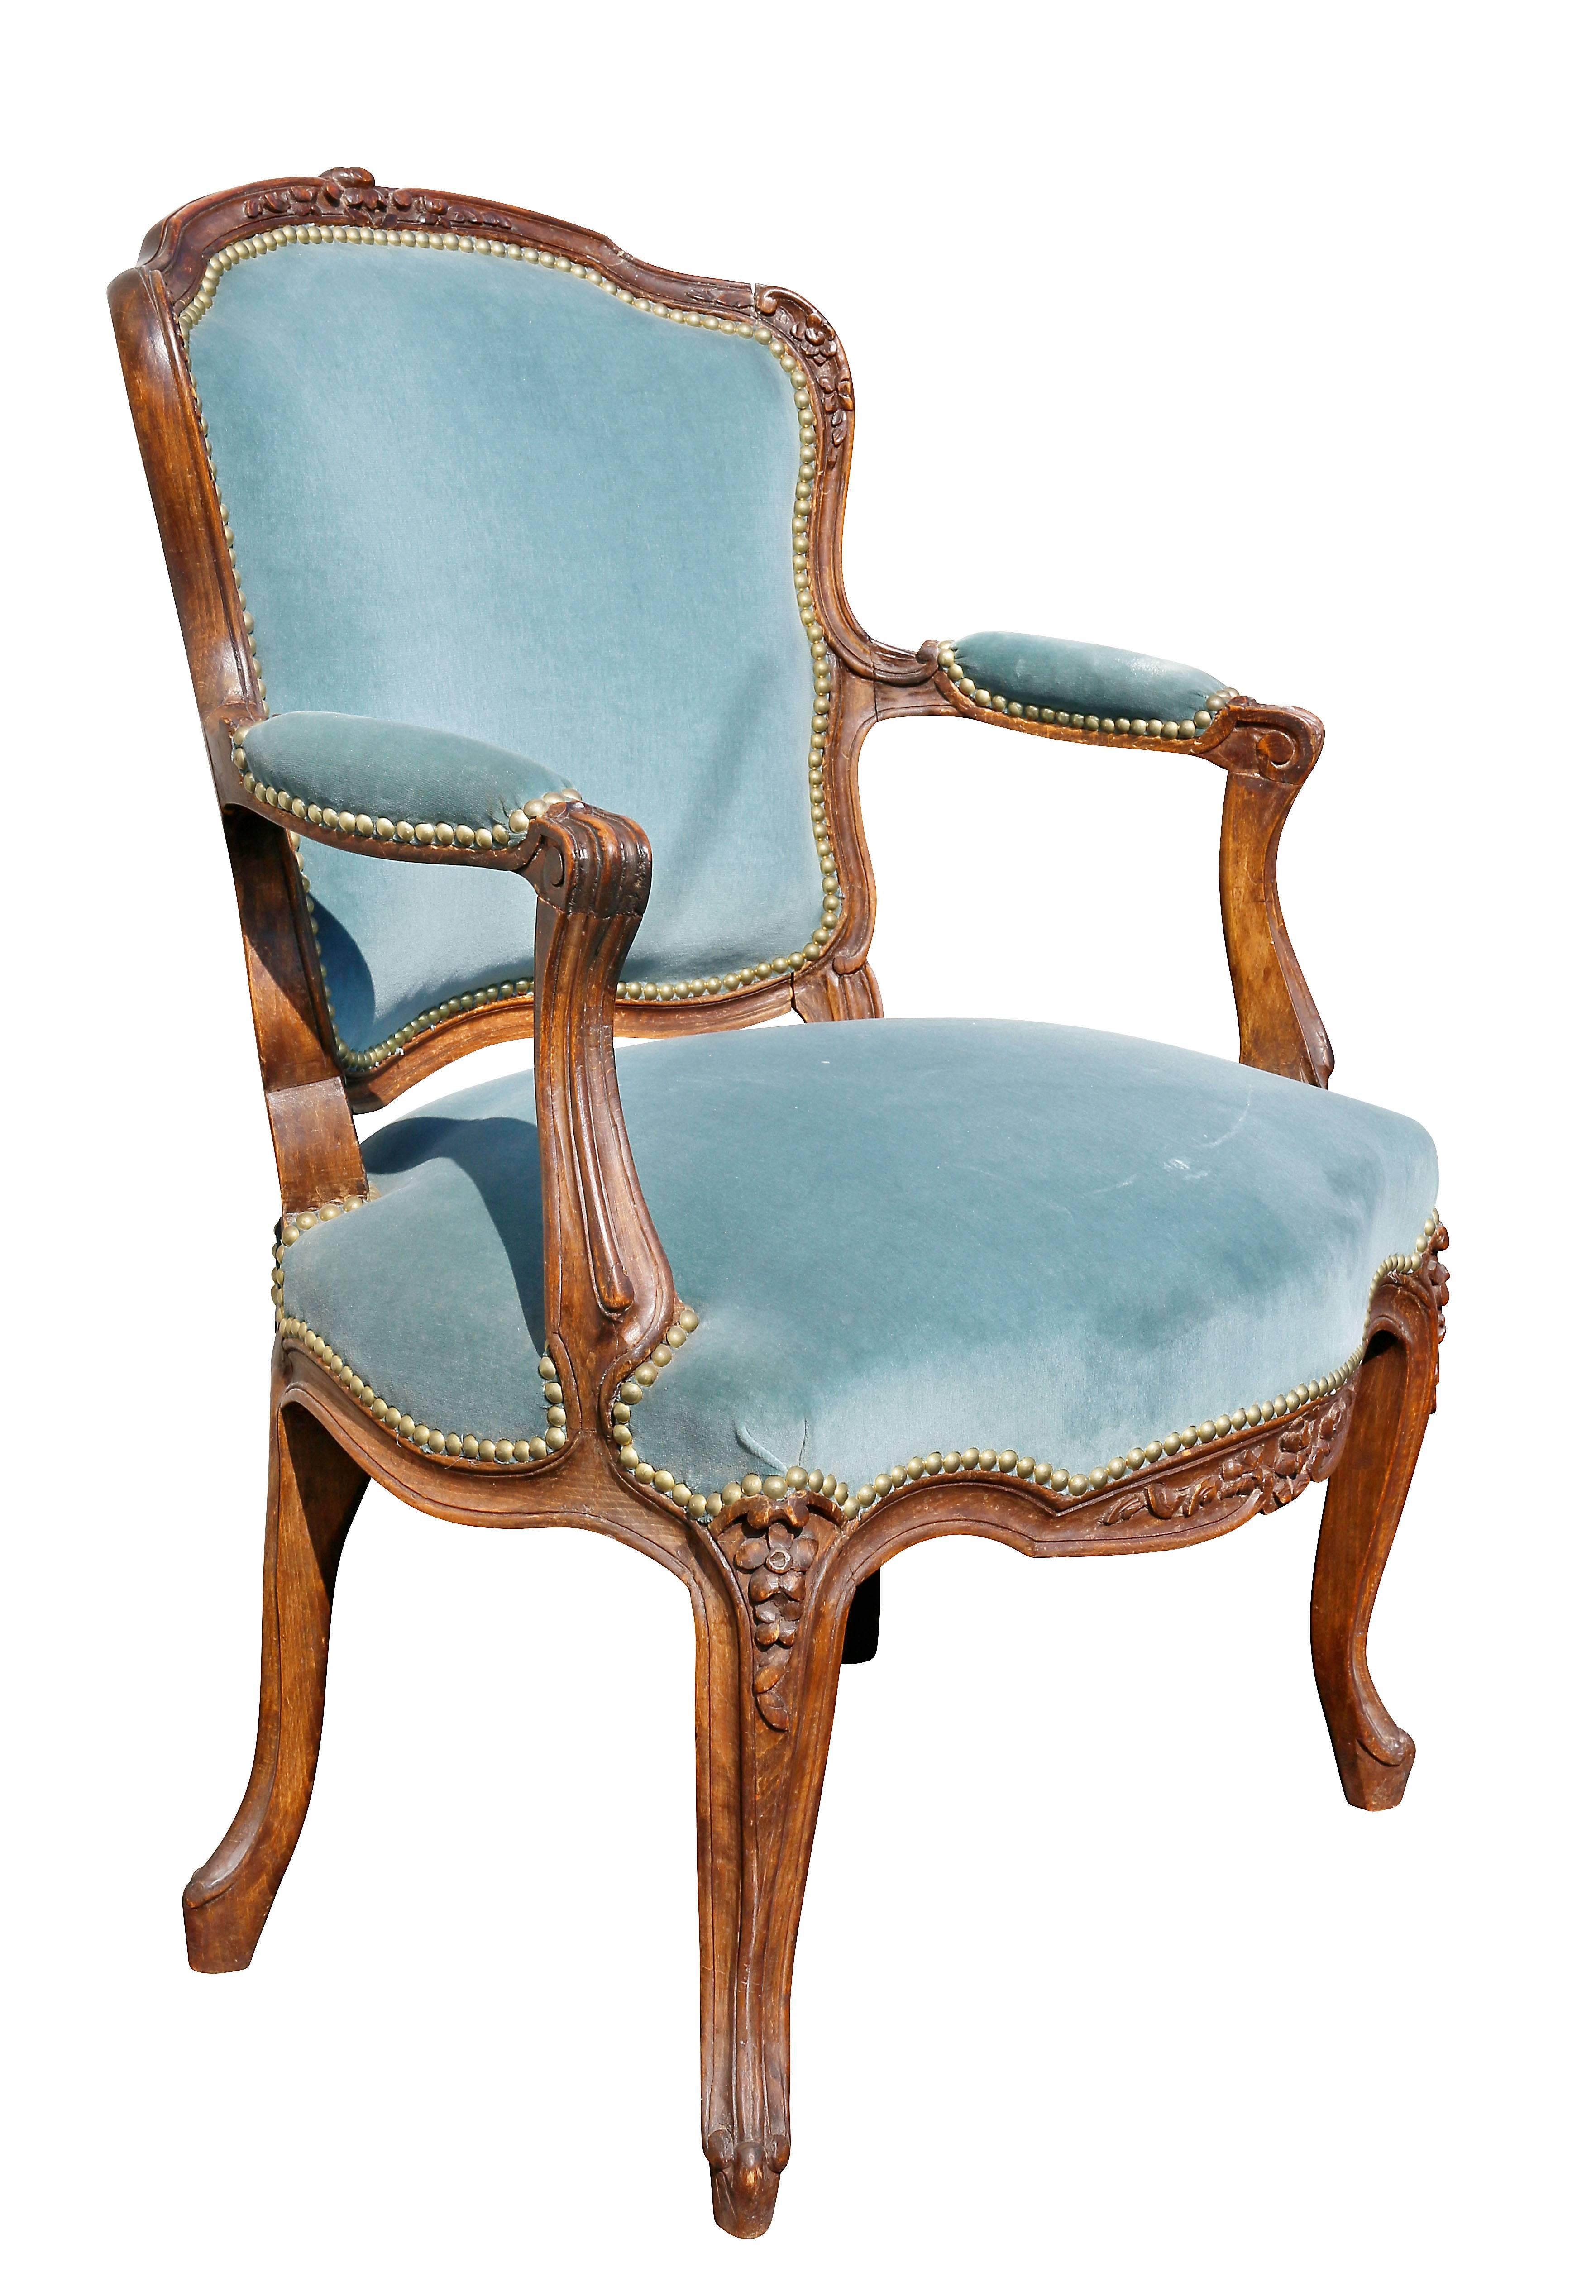 Carved shaped crestrail and upholstered back and seat raised on cabriole legs.